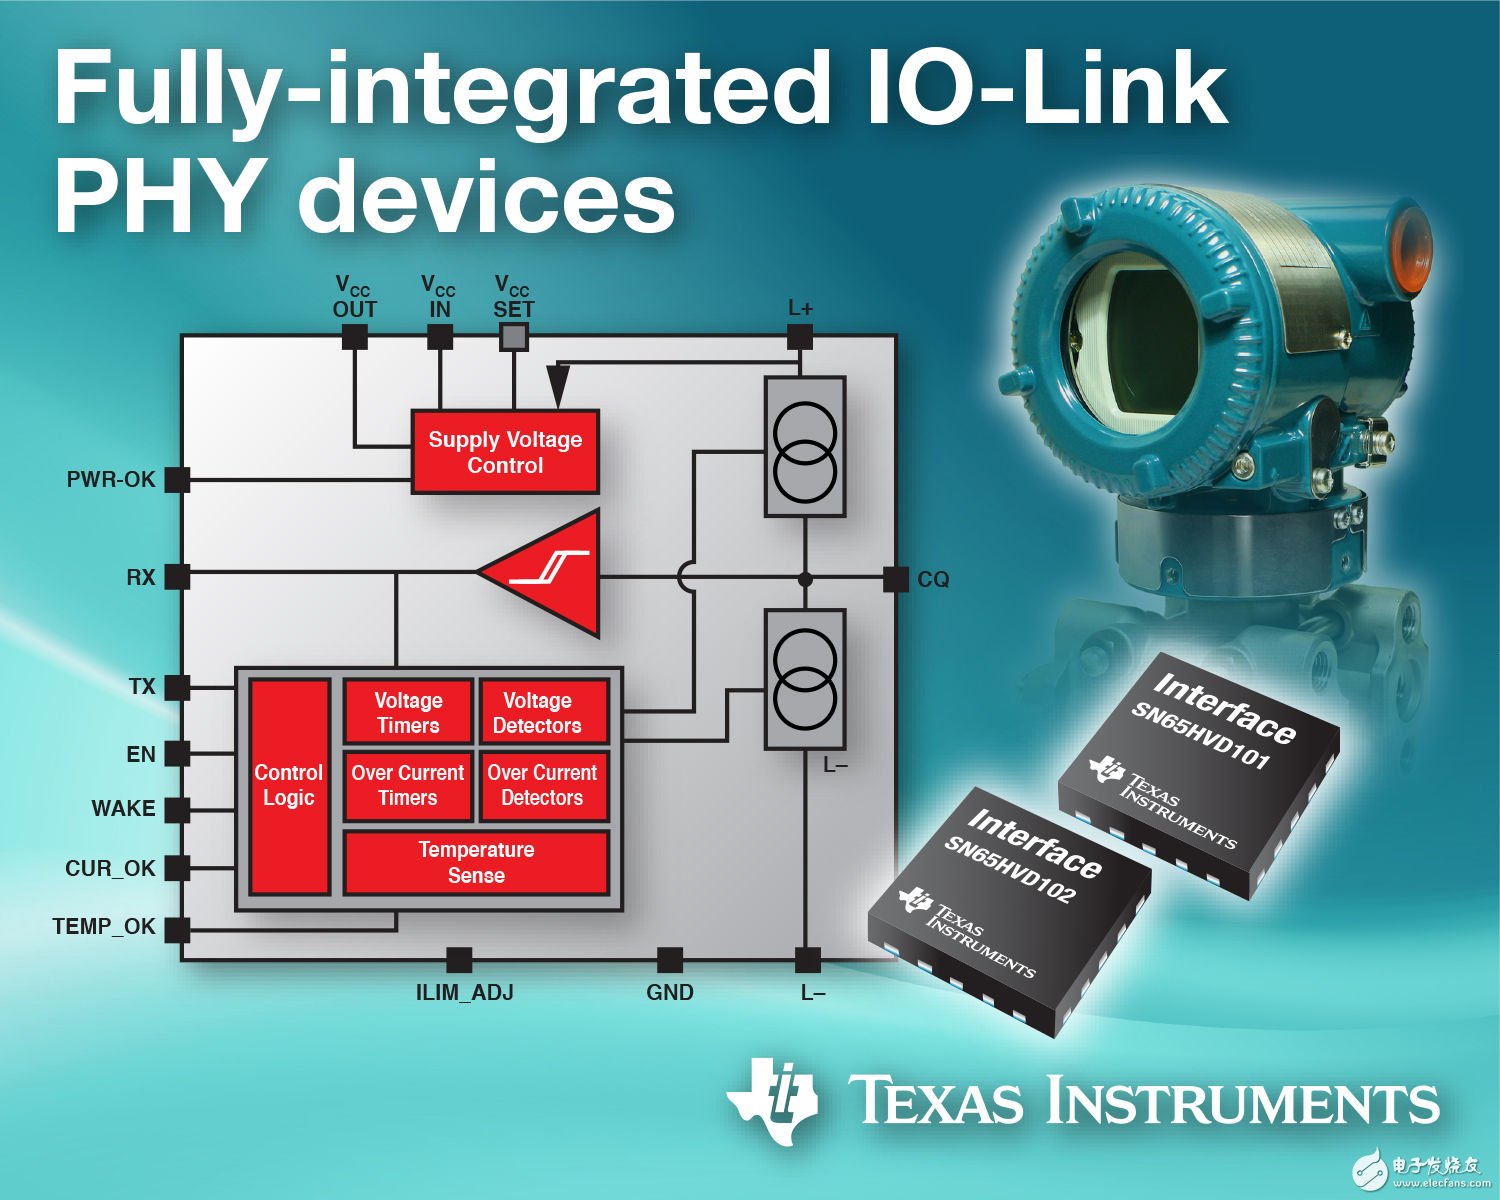 Texas Instruments announced the latest series of fully integrated IO-LINK physical layer devices